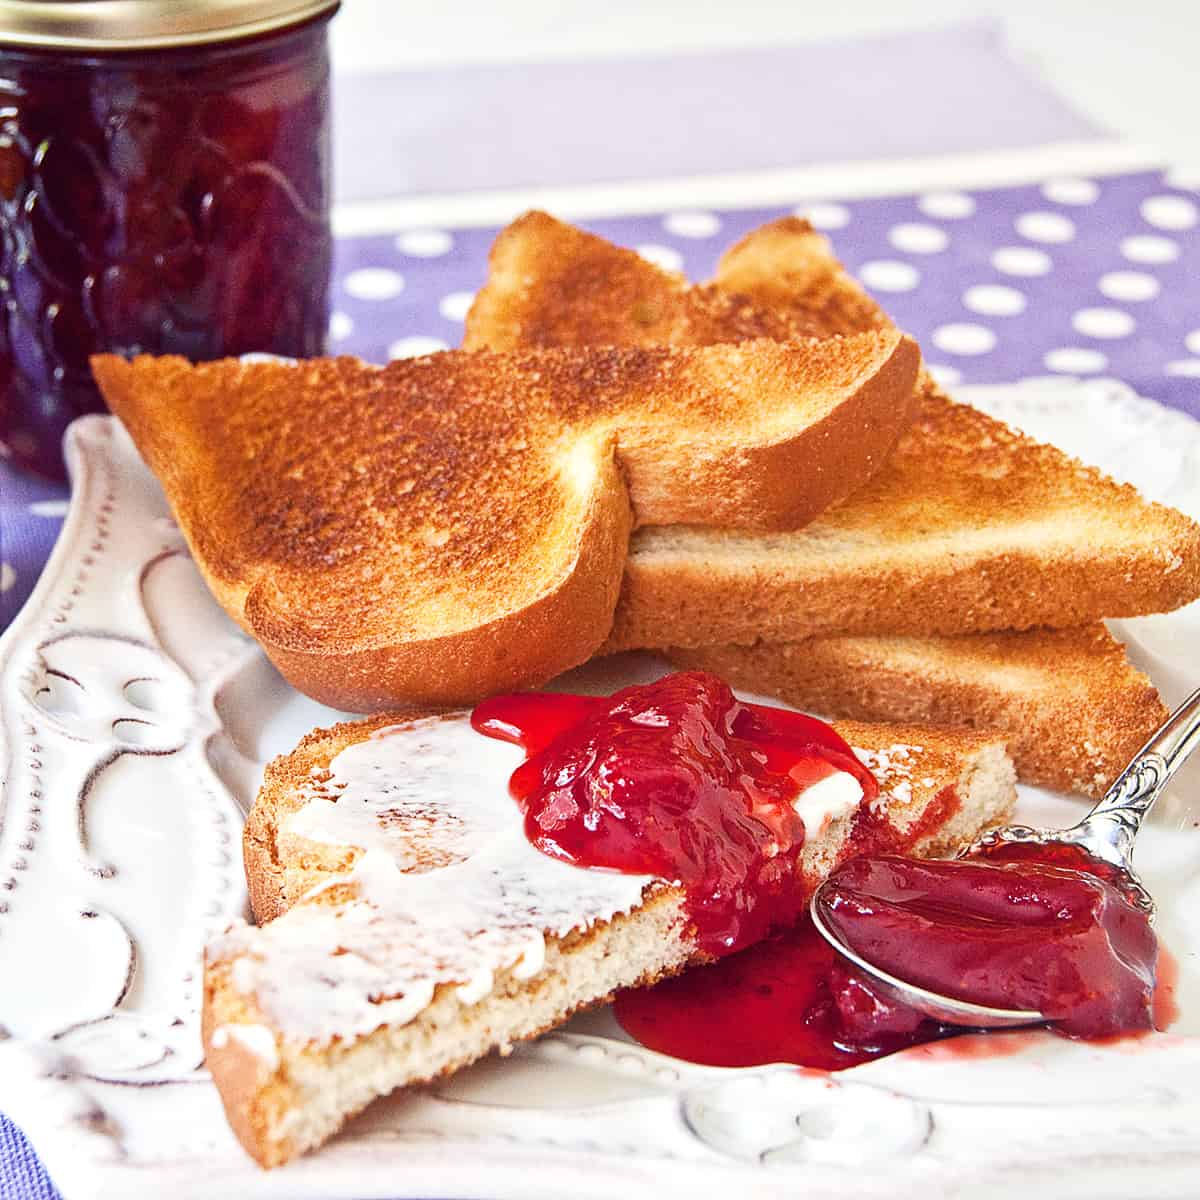 Strawberry jam on buttered toast with jars of jam in the background.